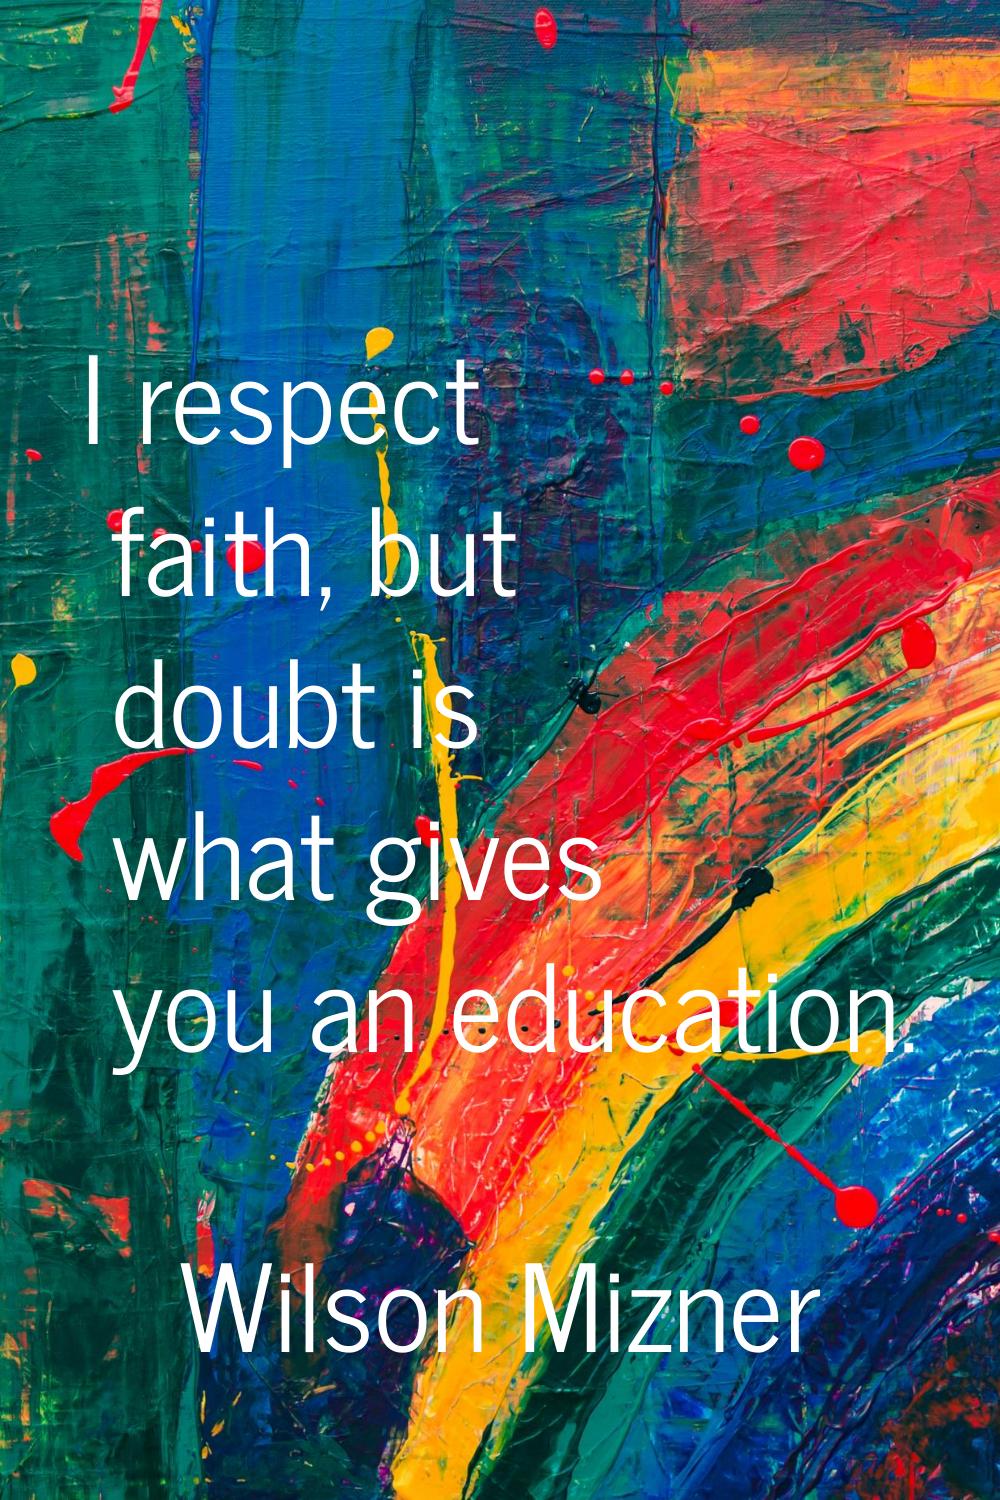 I respect faith, but doubt is what gives you an education.